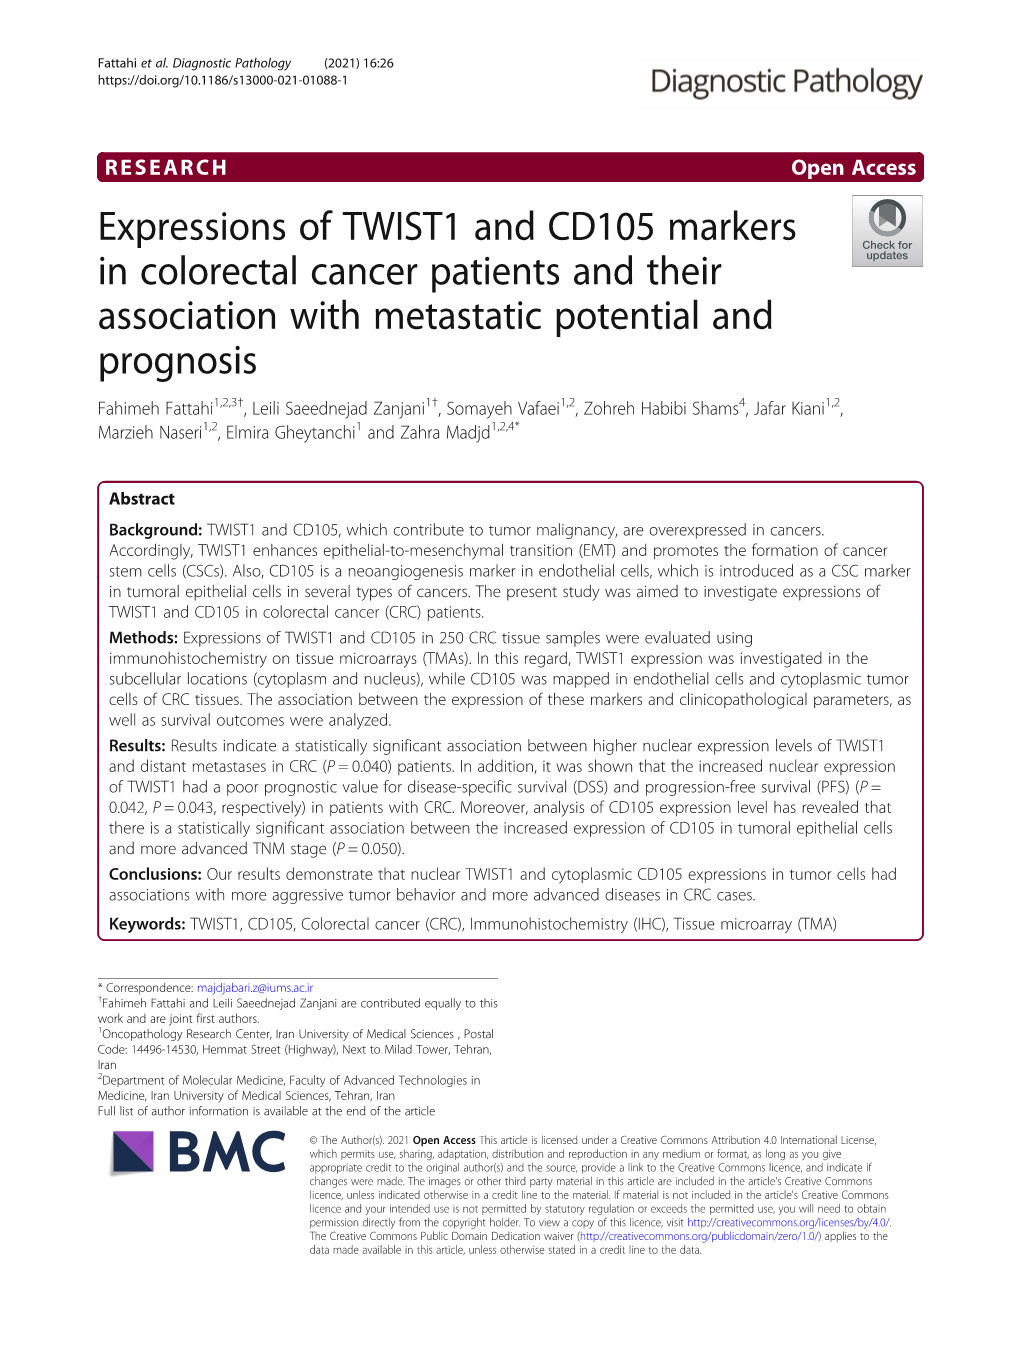 Expressions of TWIST1 and CD105 Markers in Colorectal Cancer